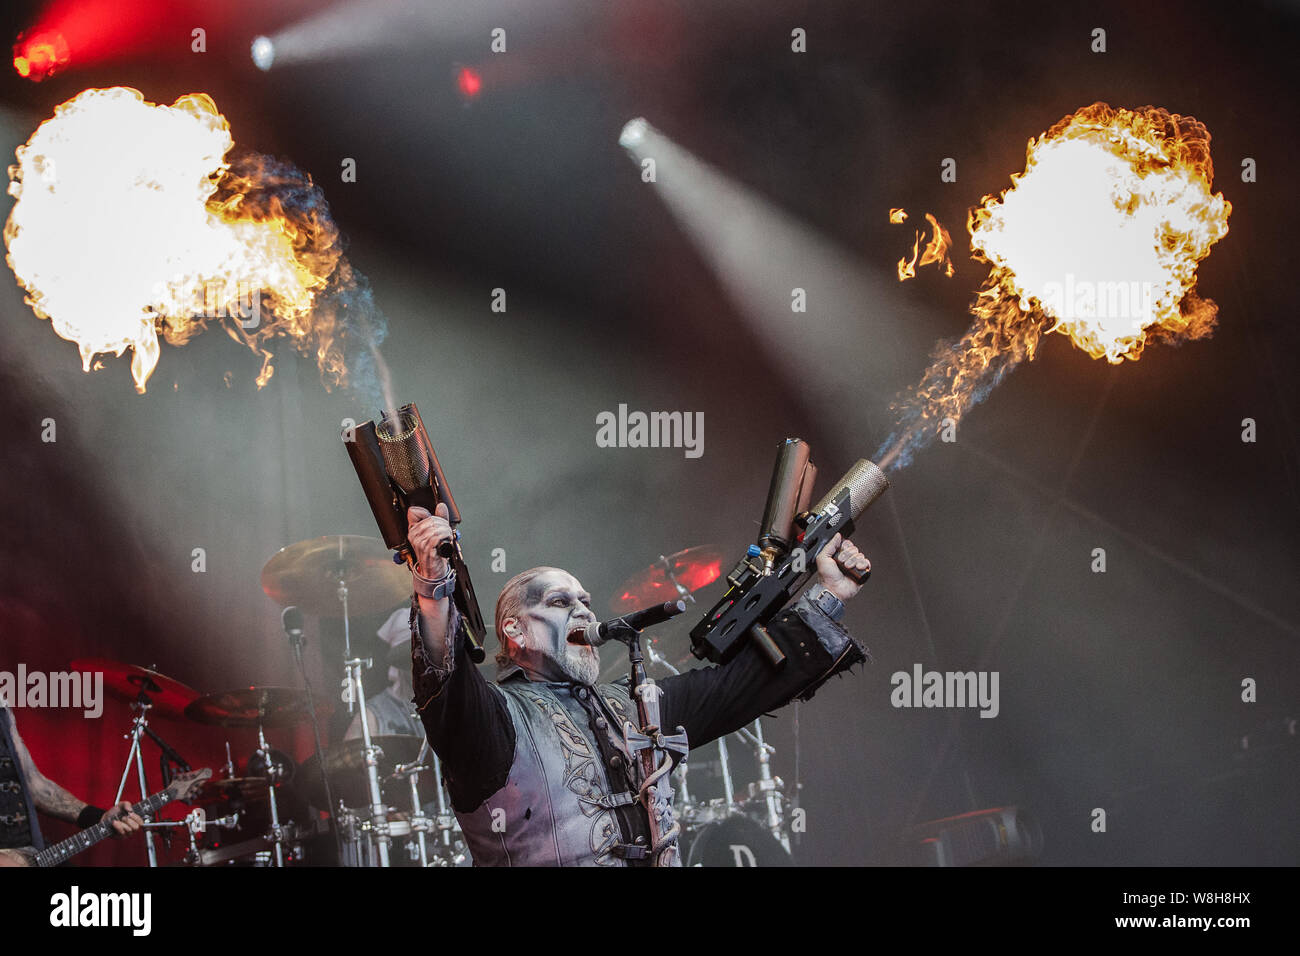 Powerwolf perform live on stage at Bloodstock Open Air Festival, UK, 9th Aug, 2019. Stock Photo